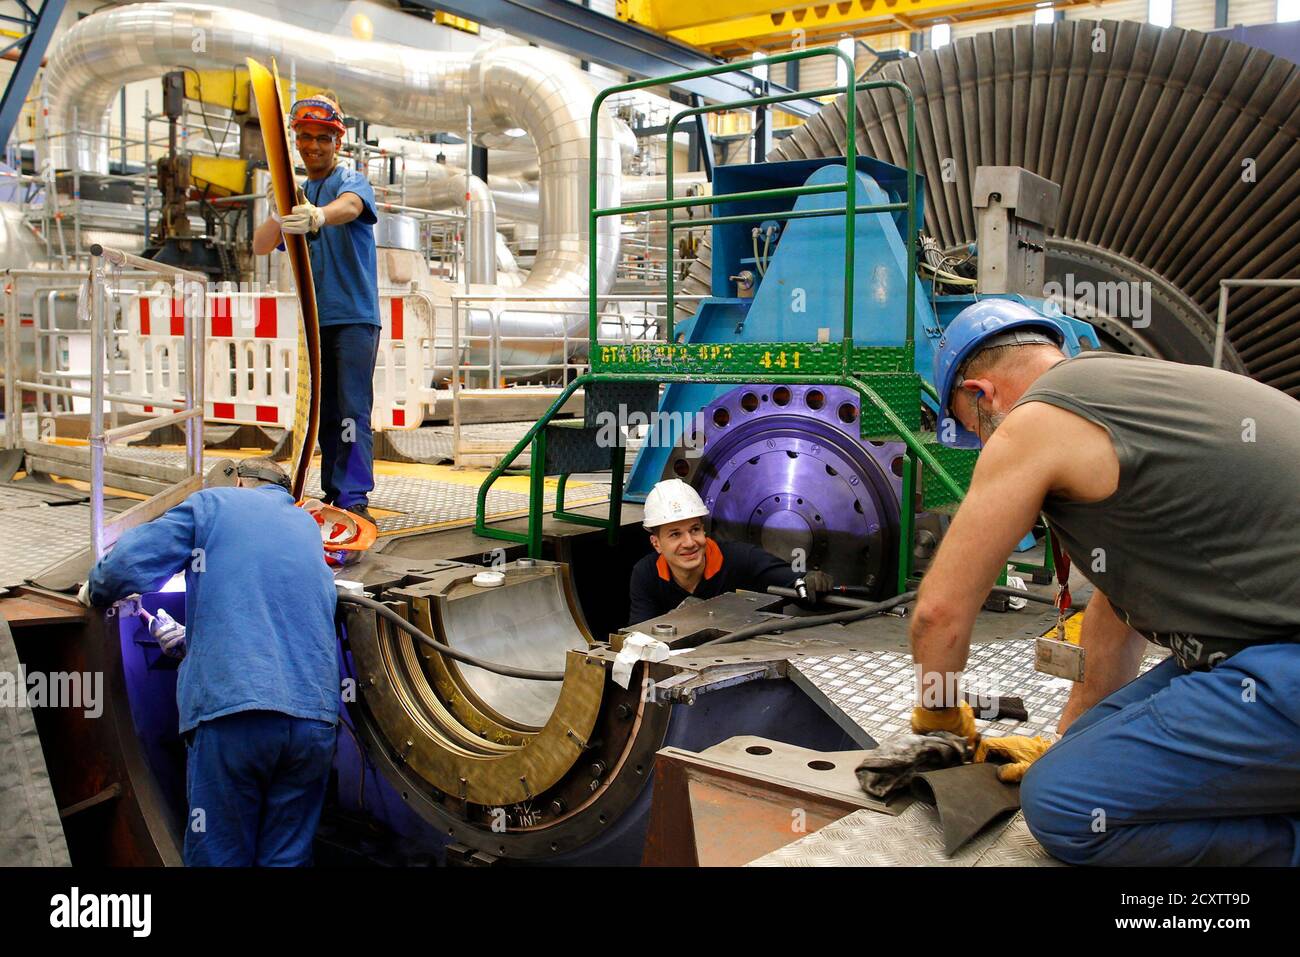 Technicians work near a turbine during a planned maintenance intervention  at the Bugey nuclear power plant in Saint-Vulbas, near Lyon April 19, 2011.  Electricite de France (EDF) runs the country's 58 nuclear